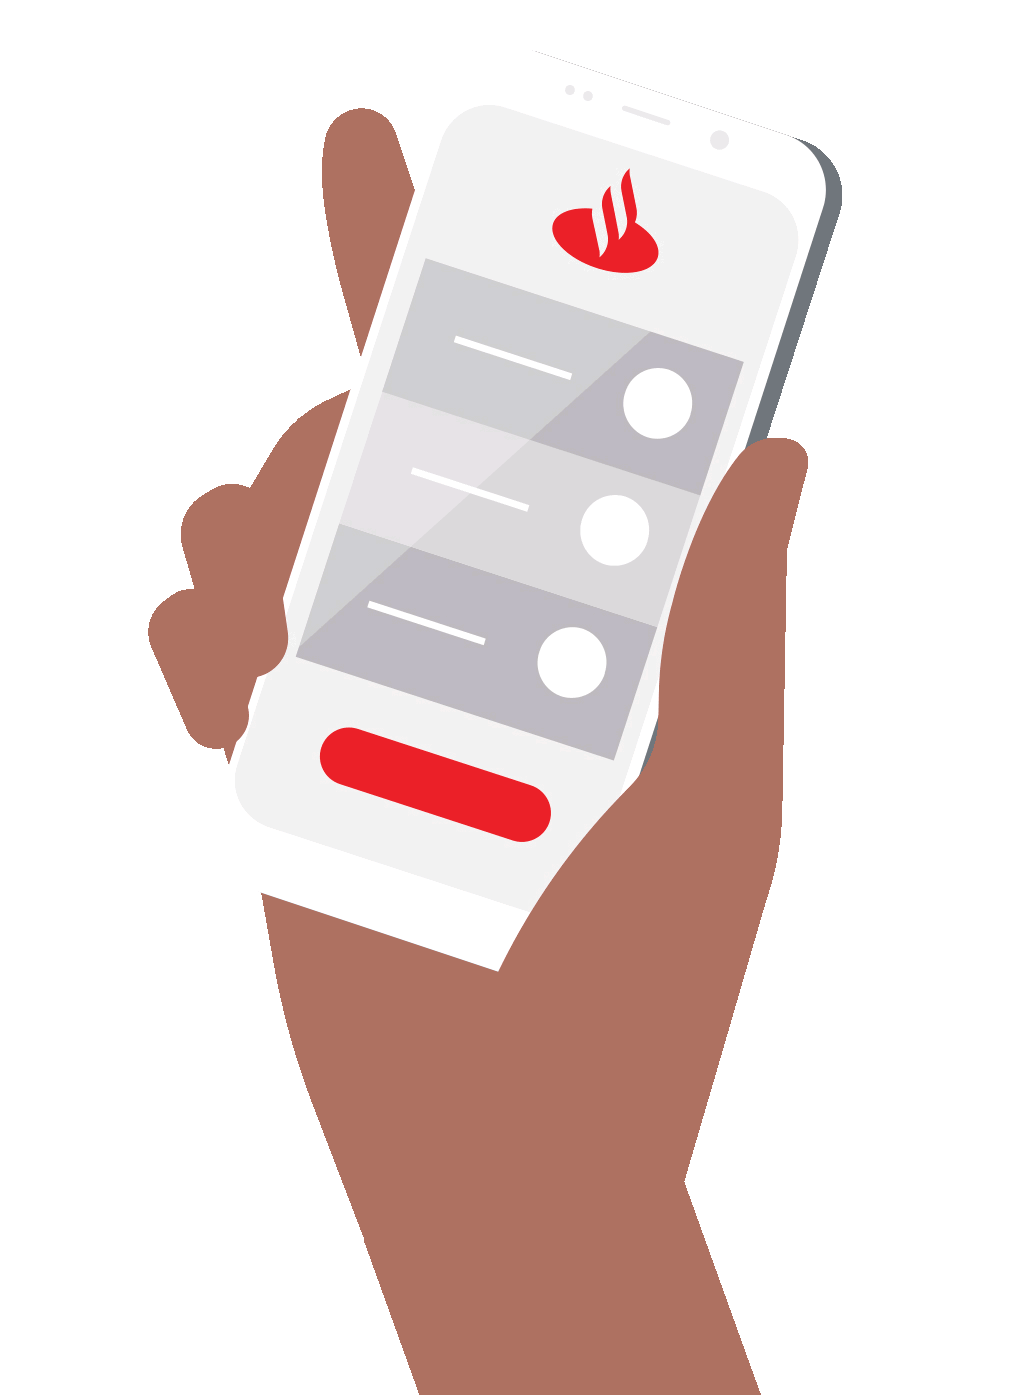 illustration animation of a hand holding a mobile phone with a form checklist being checked off